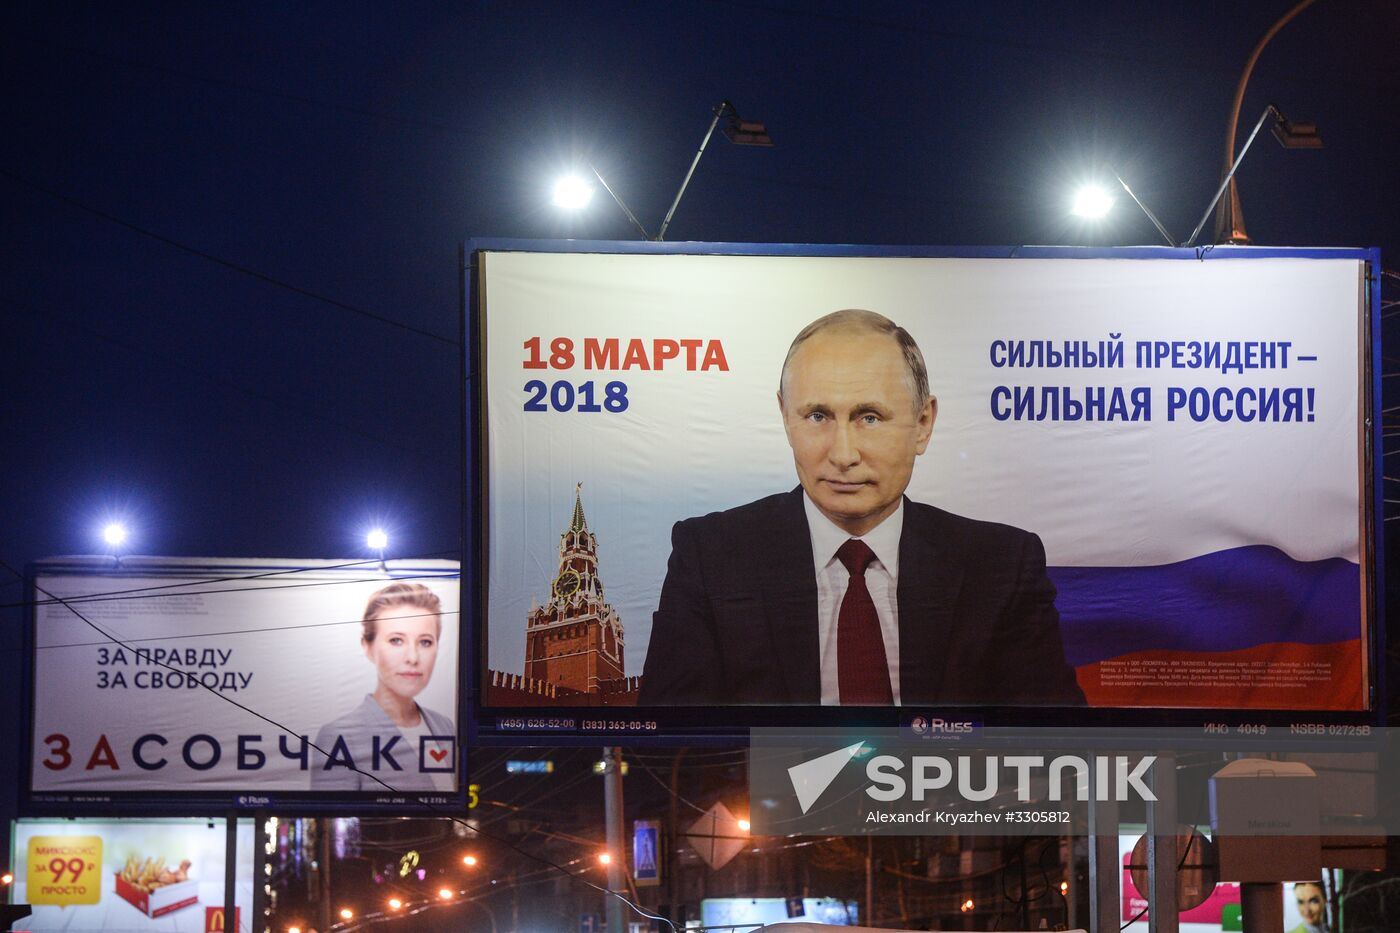 Election campaign posters in Novosibirsk